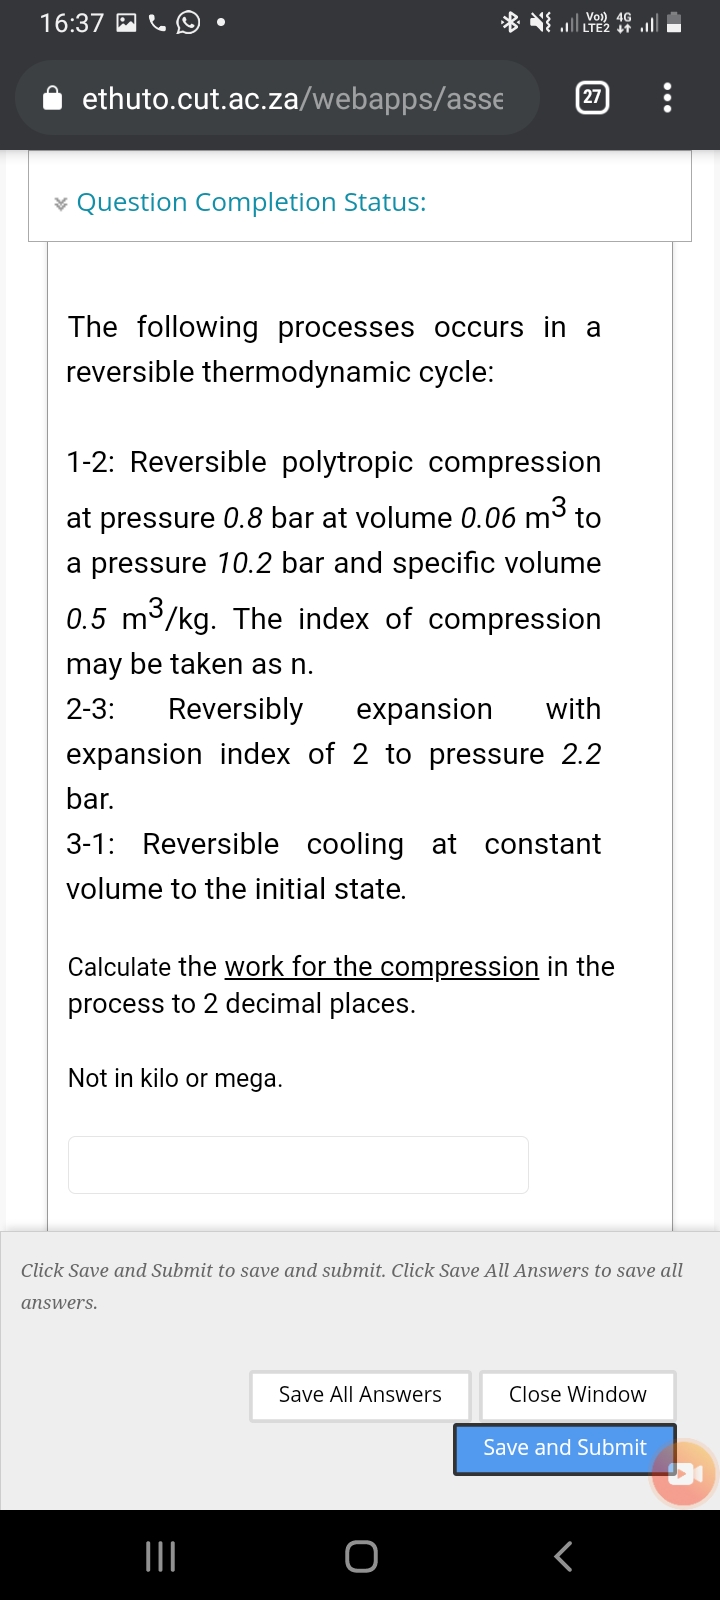 16:37 A
ll LTE2 1t
ethuto.cut.ac.za/webapps/asse
27
* Question Completion Status:
The following processes occurs in a
reversible thermodynamic cycle:
1-2: Reversible polytropic compression
at pressure 0.8 bar at volume 0.06 m3 to
a pressure 10.2 bar and specific volume
0.5 m3/kg. The index of compression
may be taken as n.
2-3:
Reversibly
expansion
with
expansion index of 2 to pressure 2.2
bar.
3-1: Reversible cooling at constant
volume to the initial state.
Calculate the work for the compression in the
process to 2 decimal places.
Not in kilo or mega.
Click Save and Submit to save and submit. Click Save All Answers to save all
answers.
Save All Answers
Close Window
Save and Submit
